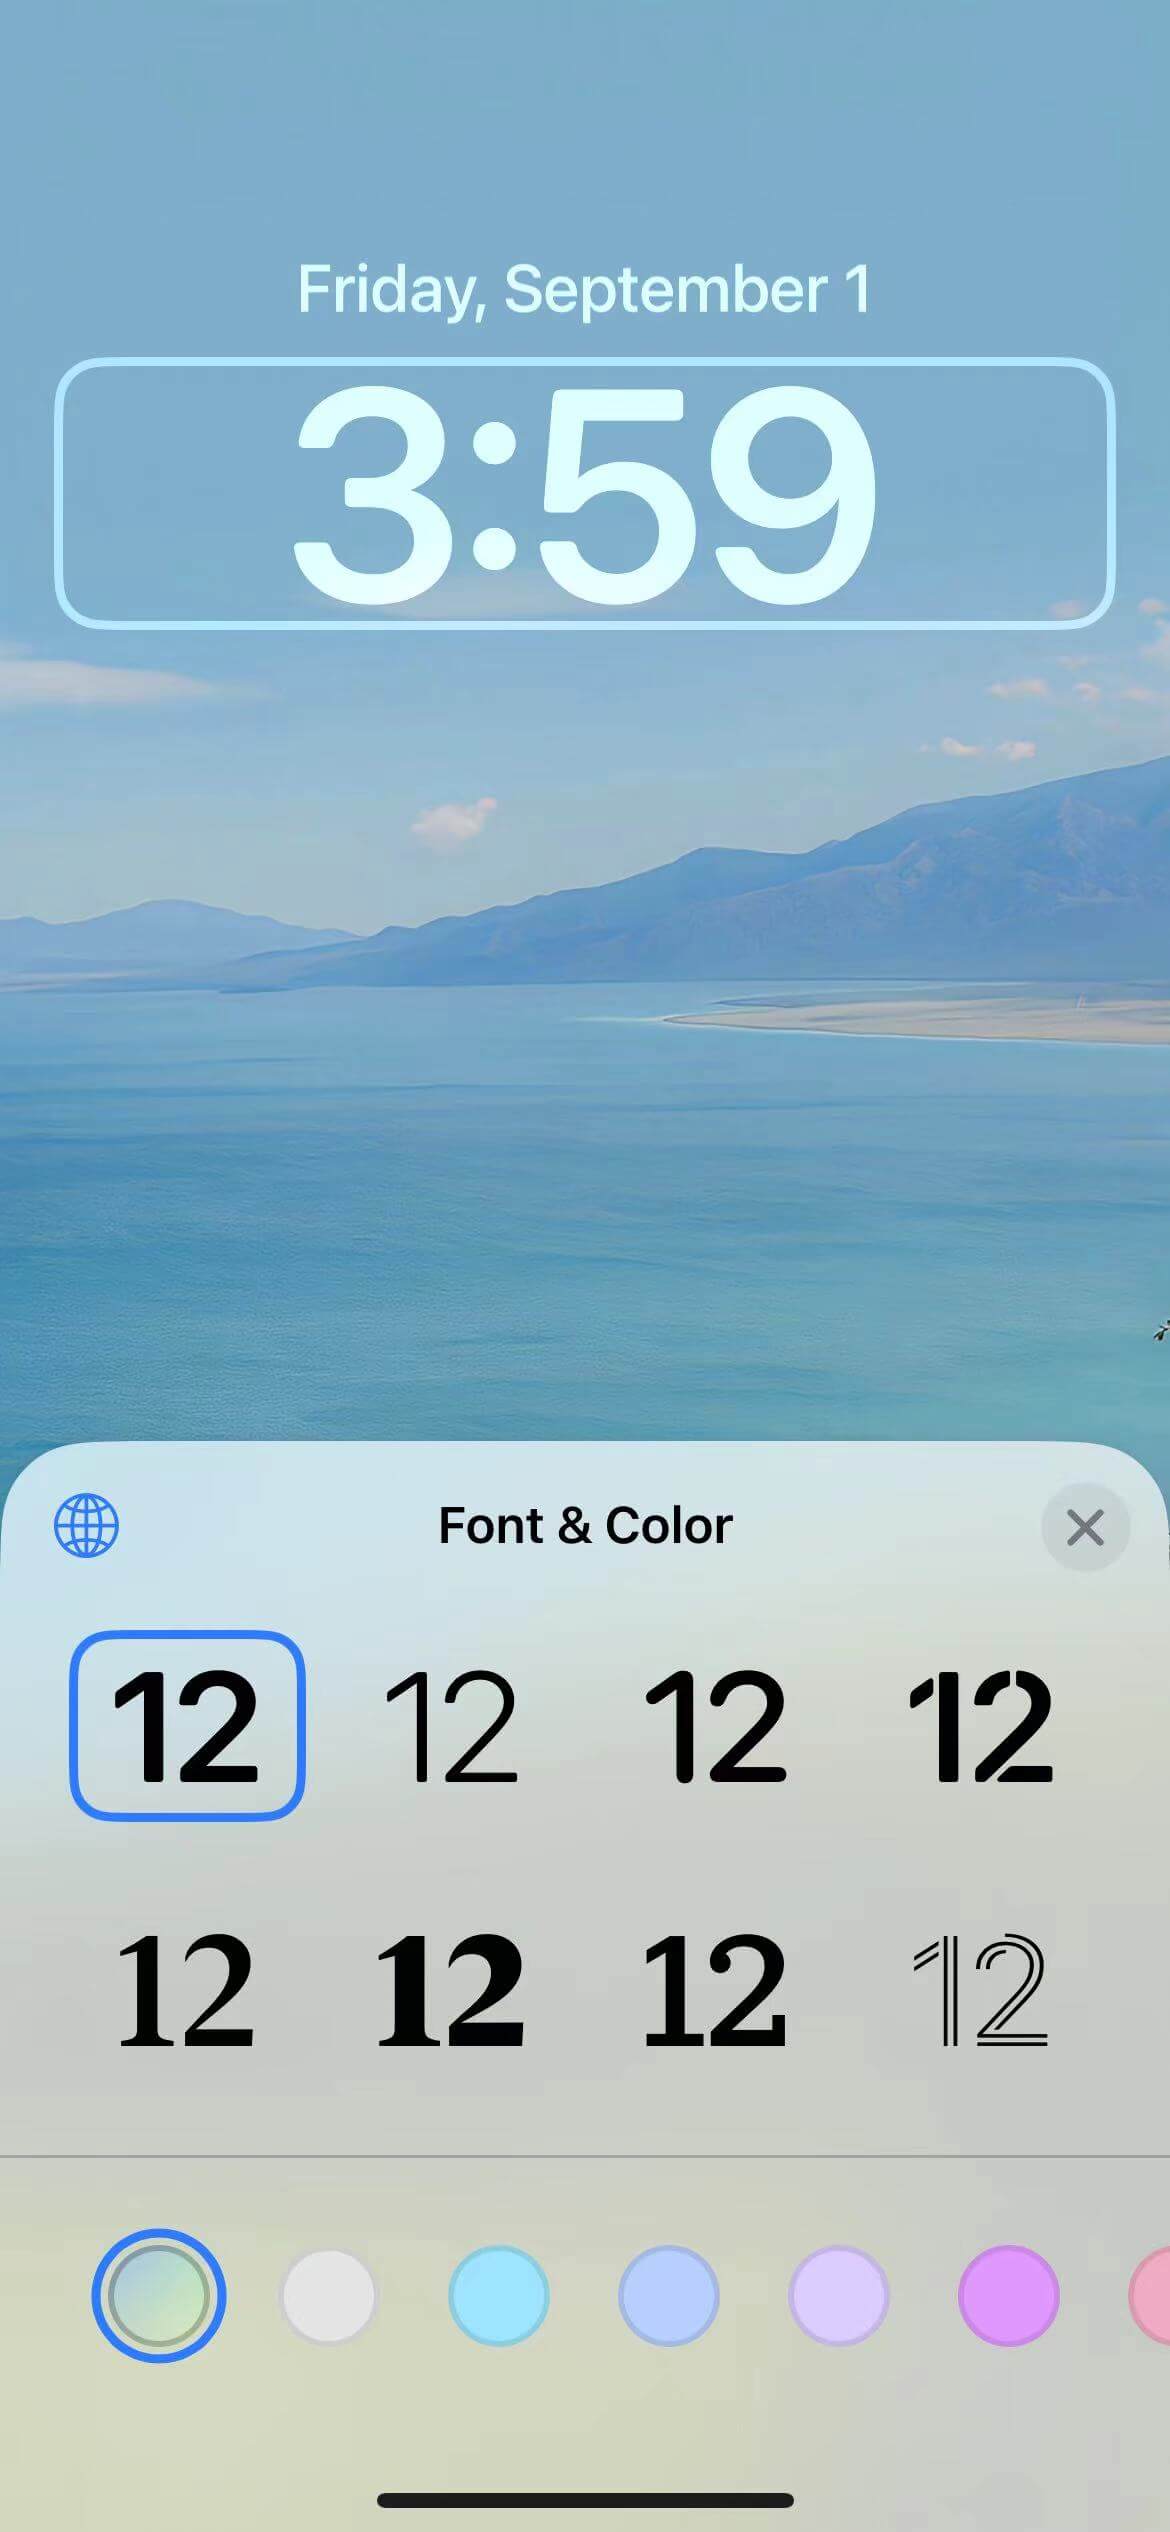 Adjust the font and color of the time in iPhone lock screen